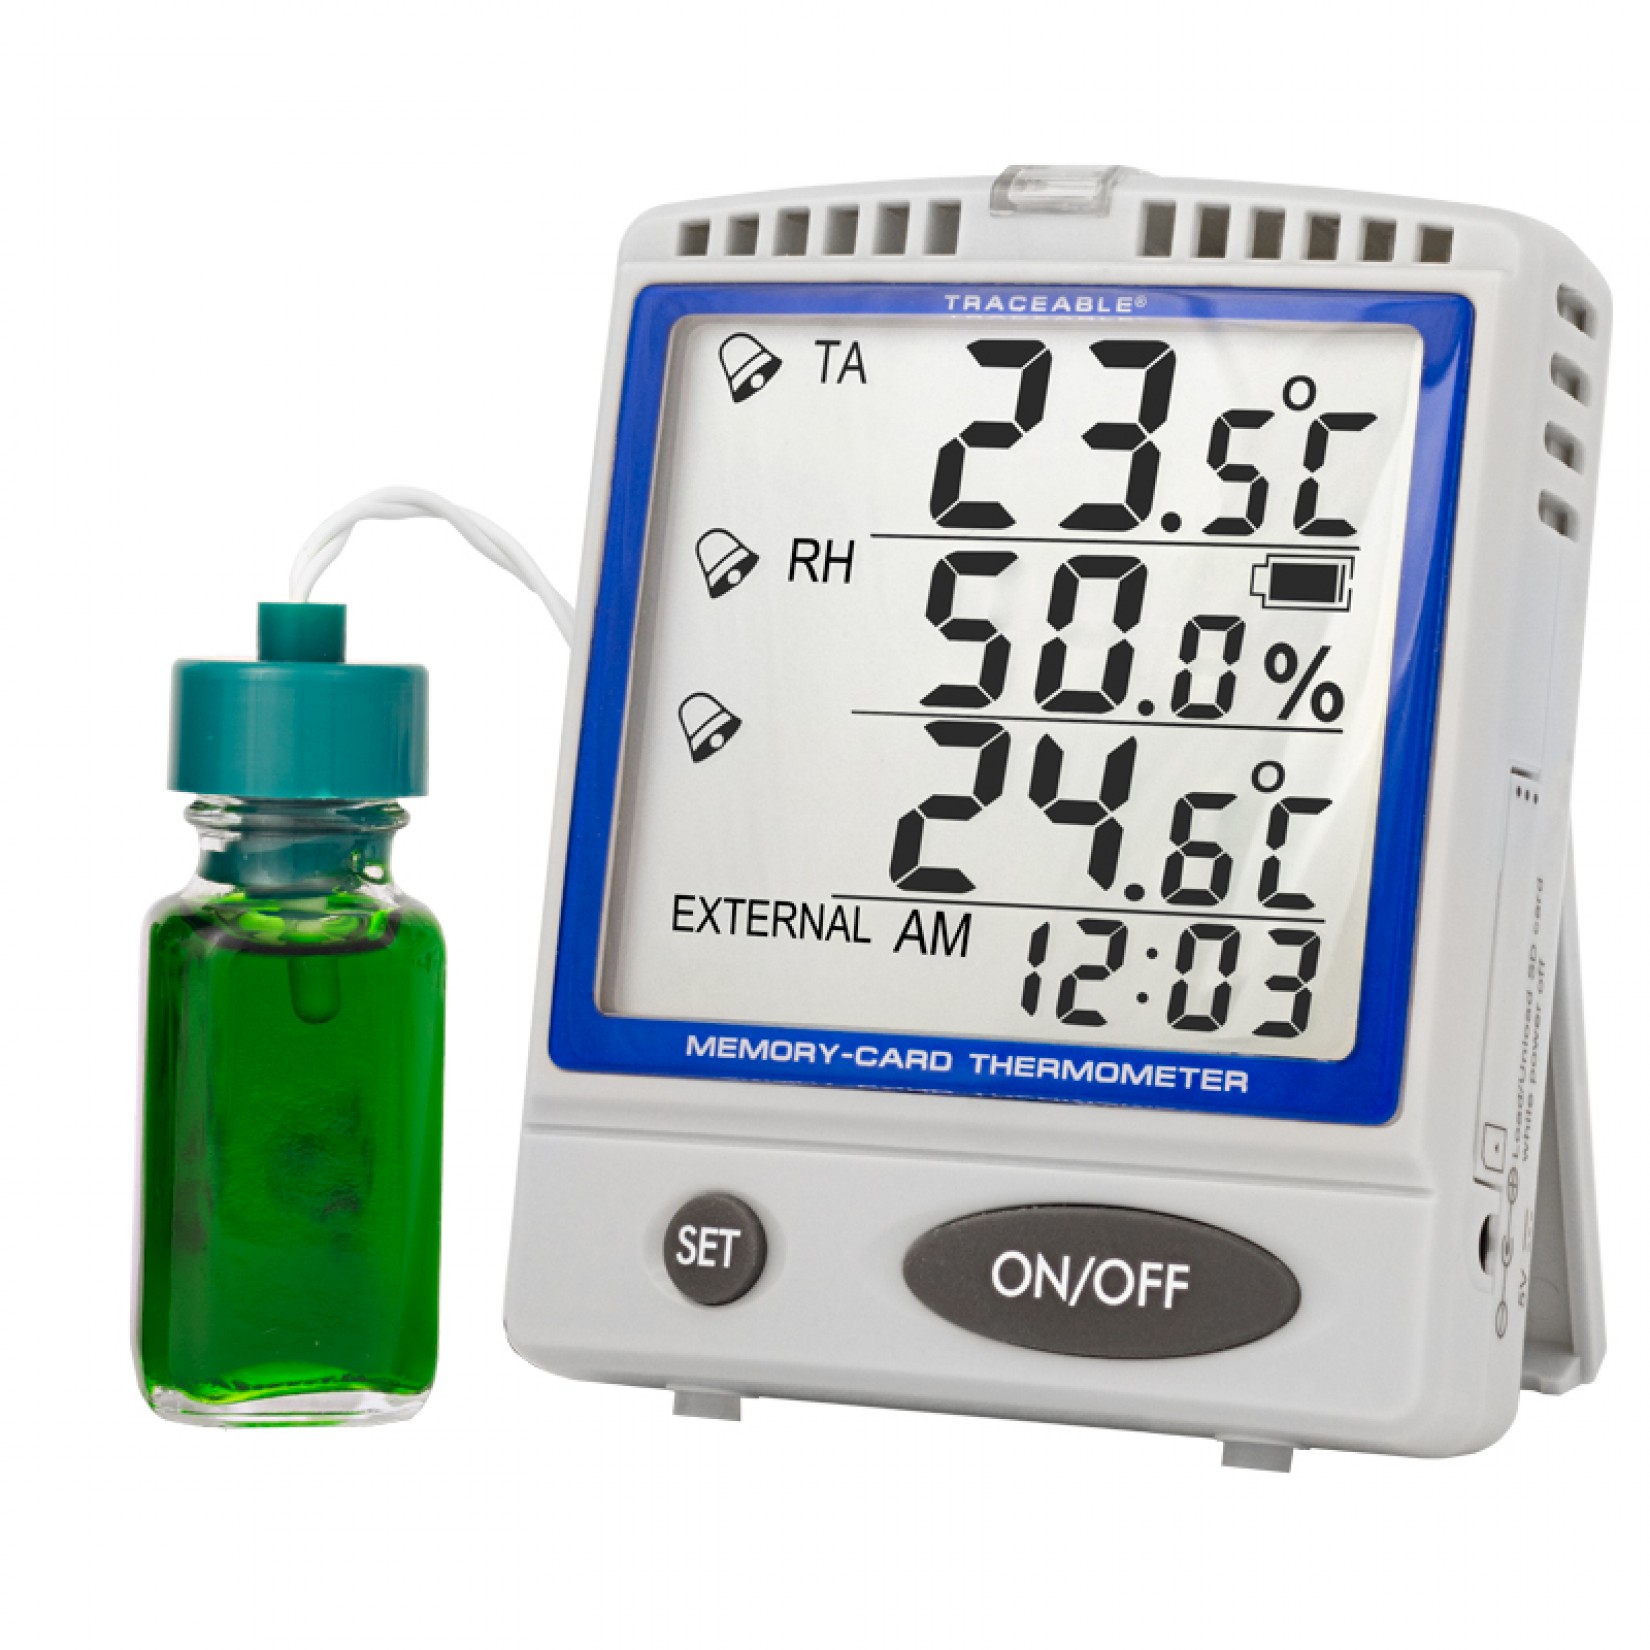 5 ml Vaccine TRACEABLE 4527 Digital Thermometer 